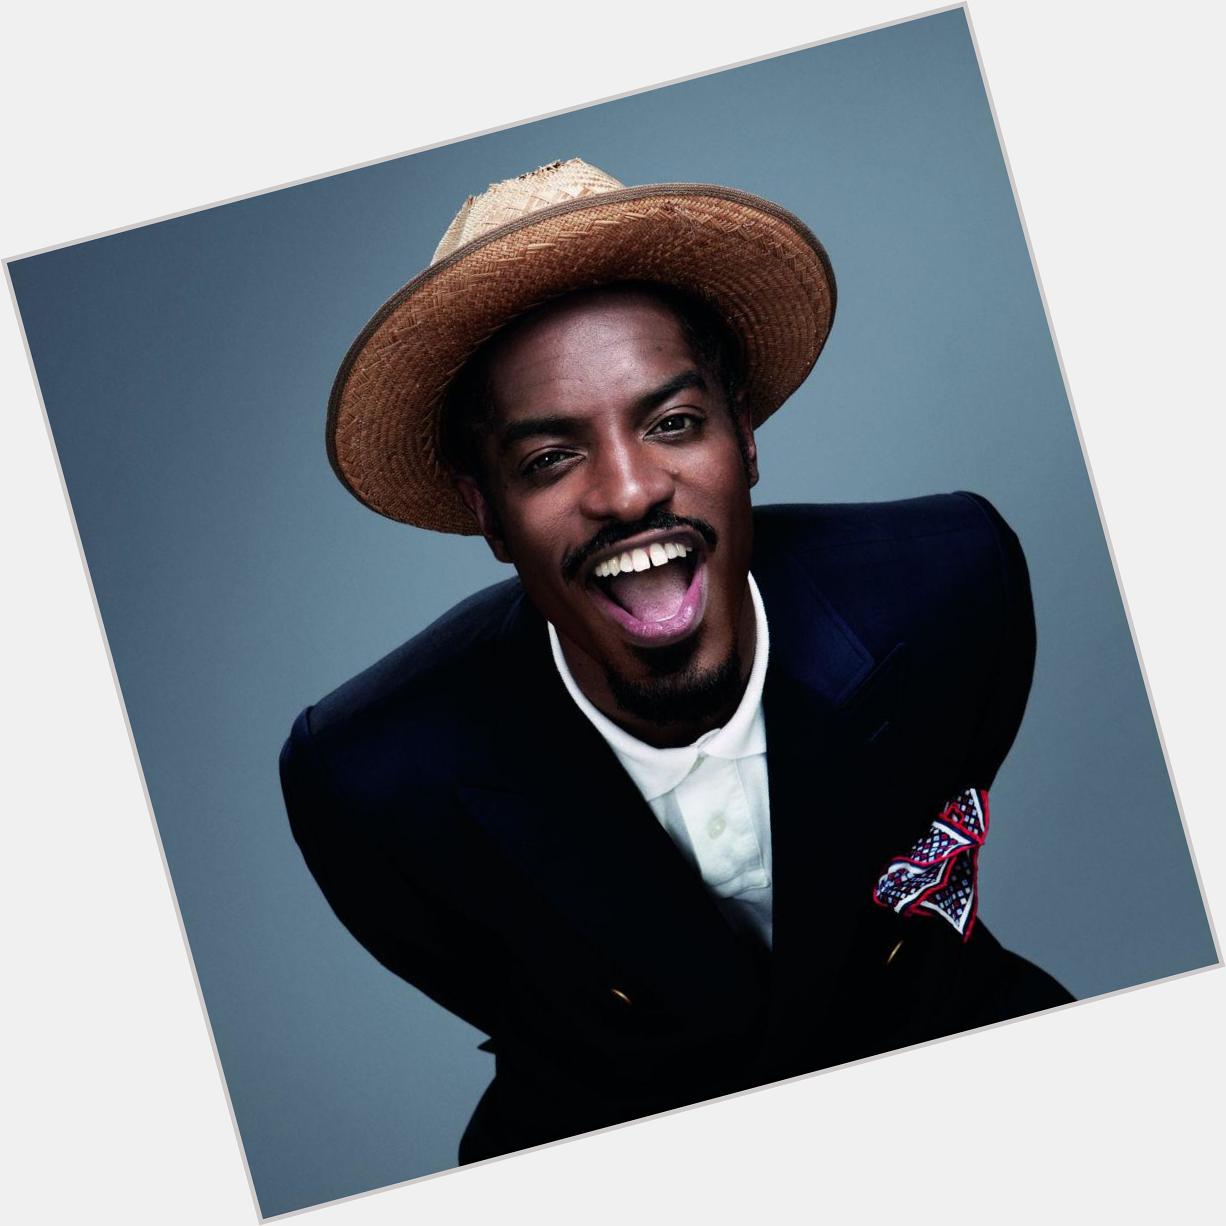 Happy Birthday to the original Classic Man. Mr. 3 Stacks! The King! The Gawd! The man. André 3000 